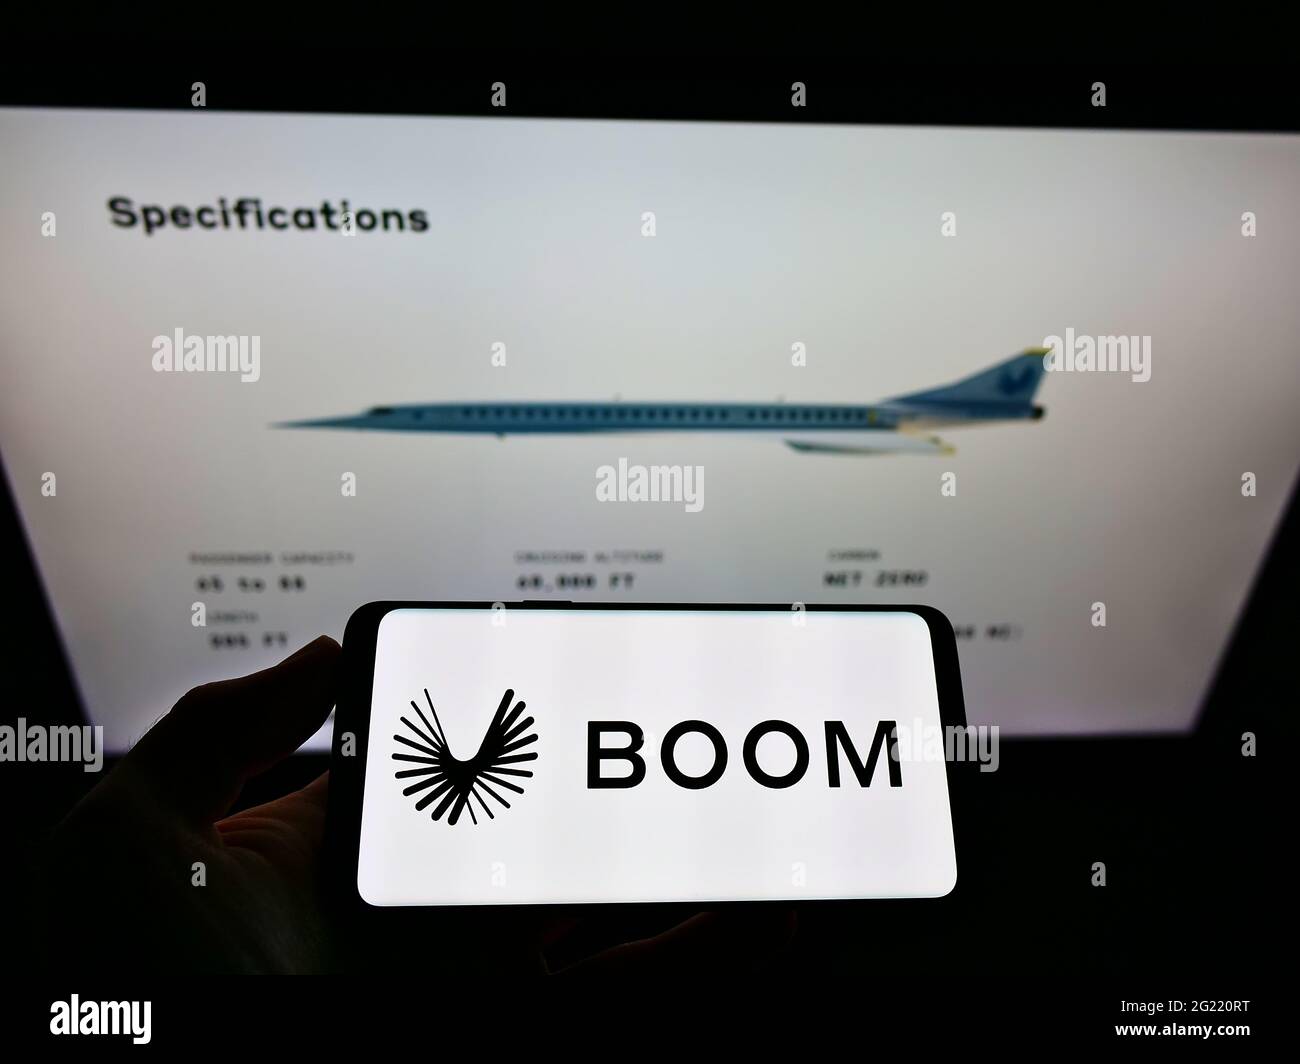 Person holding cellphone with logo of US aerospace company Boom Technology Inc. (Supersonic) on screen in front of web page. Focus on phone display. Stock Photo